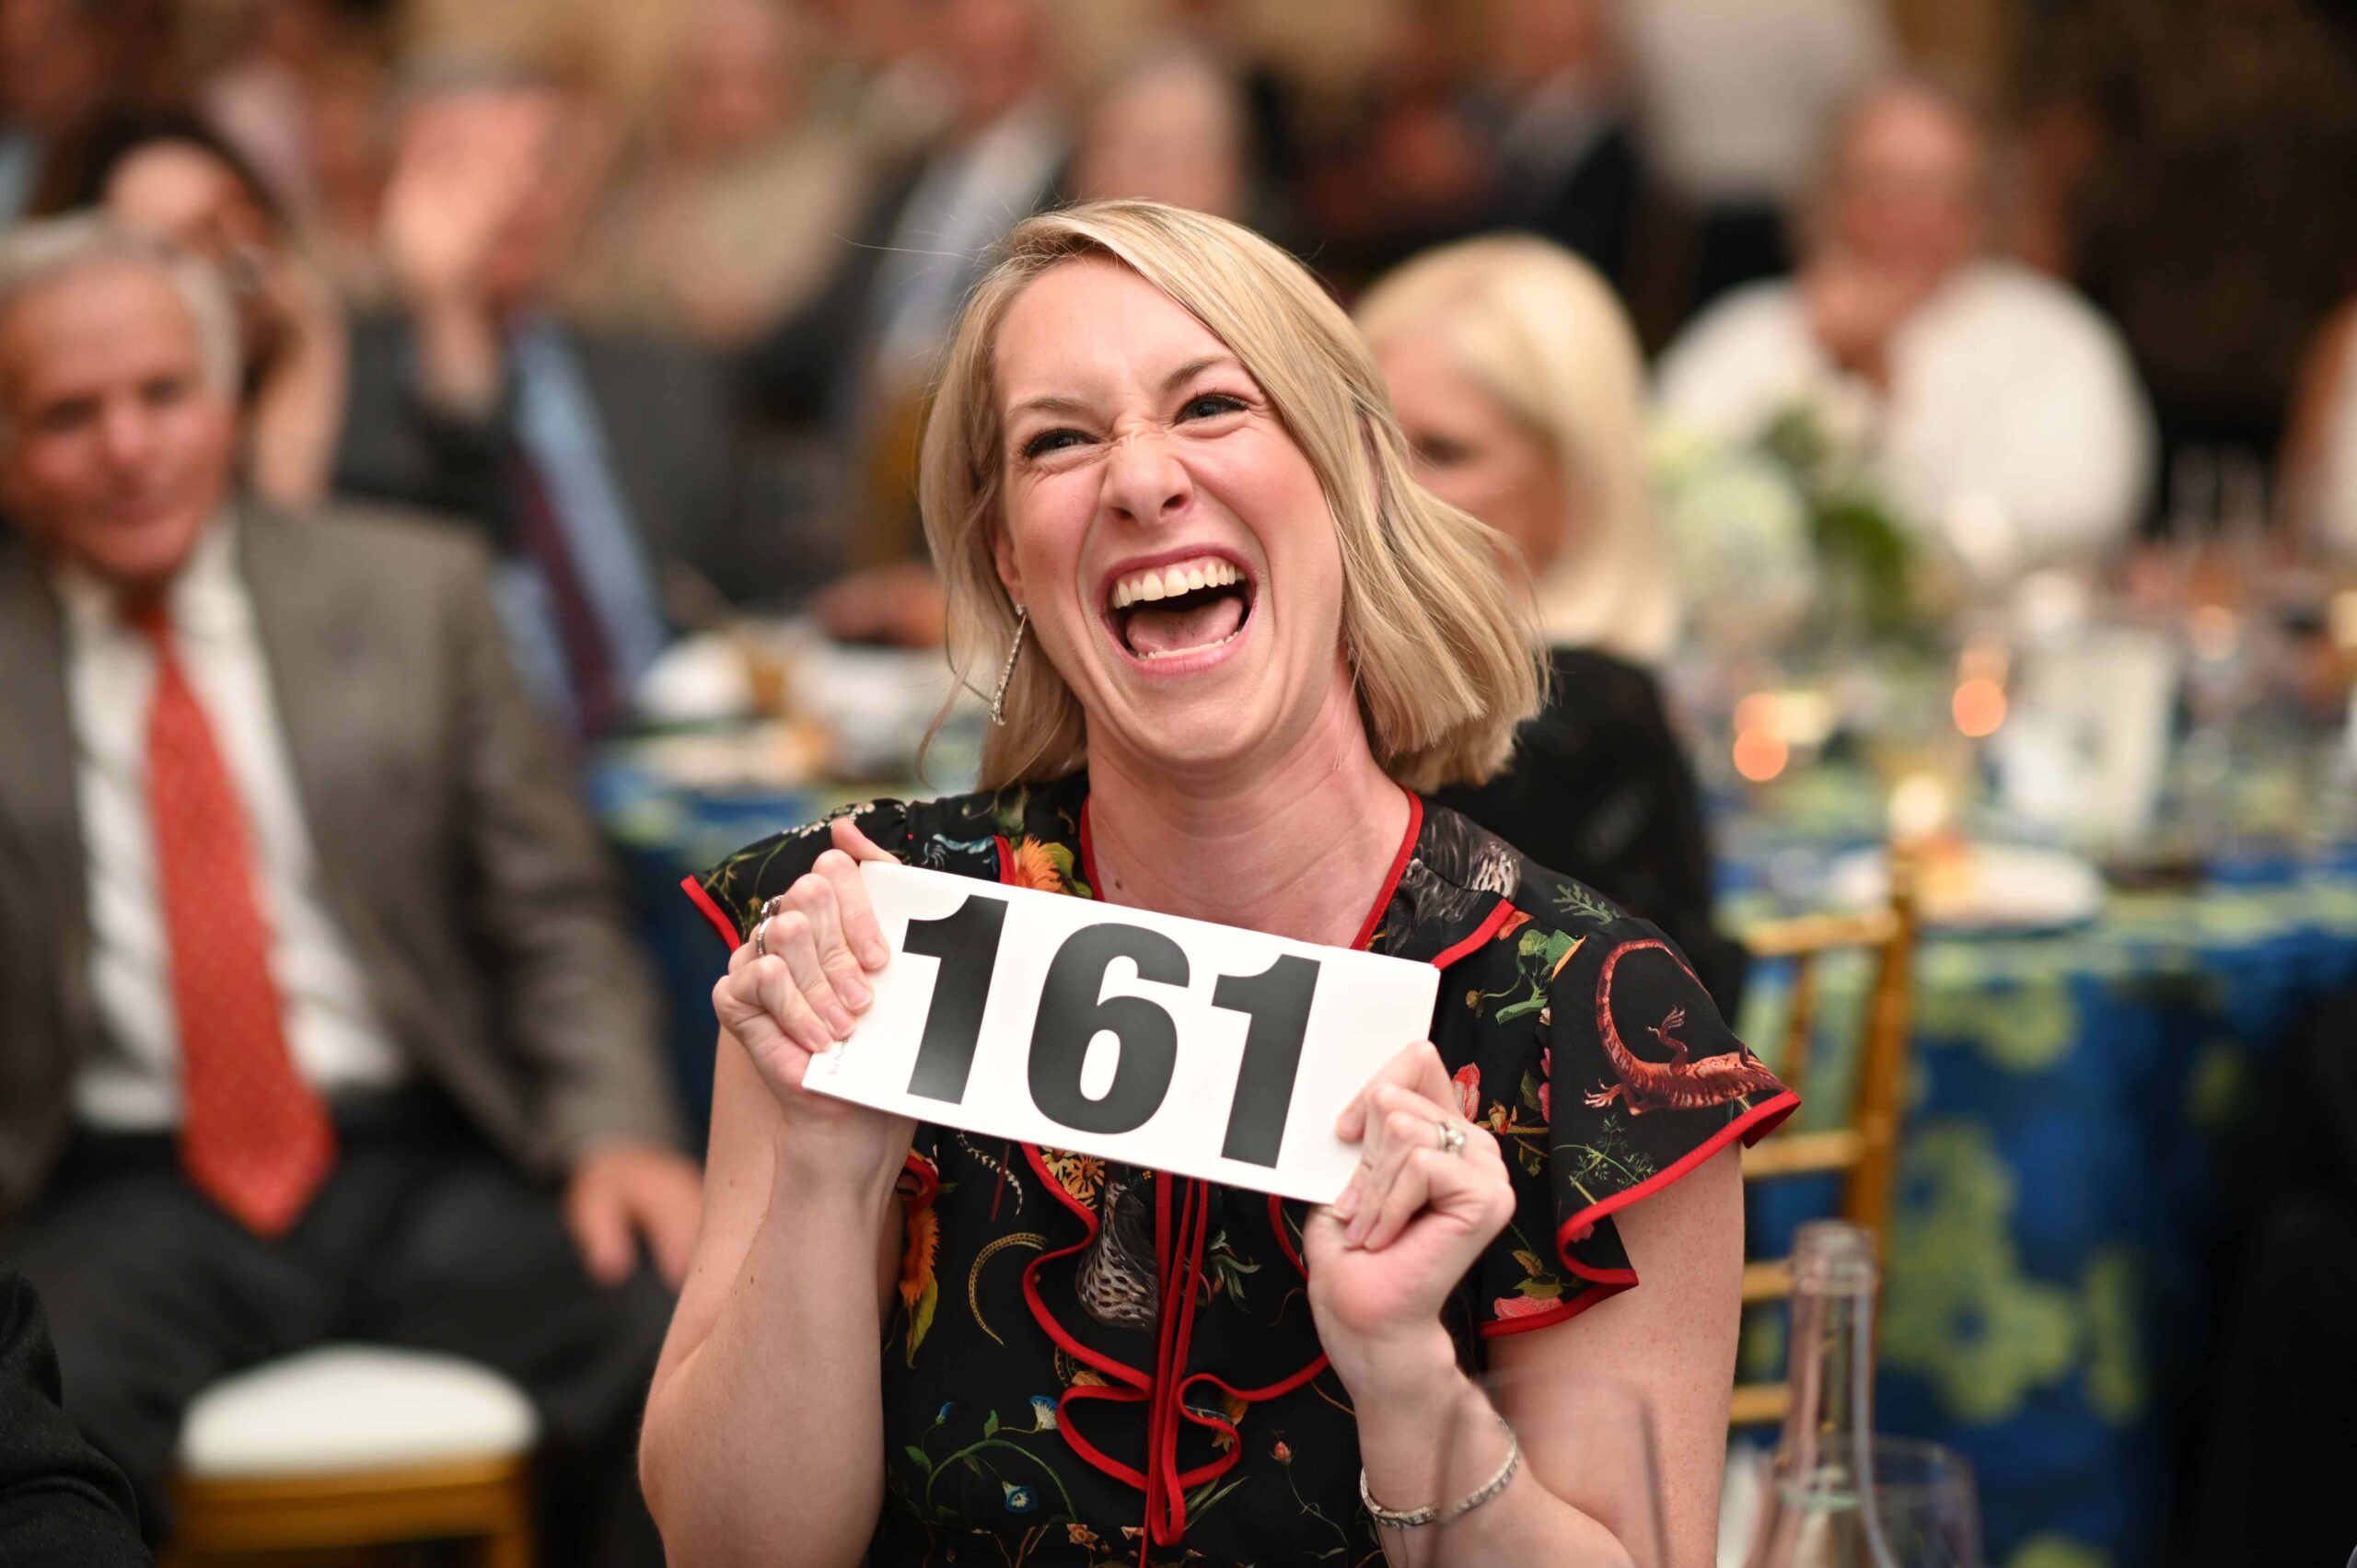 A smiling adult holds a bid number with other people out of focus in the background